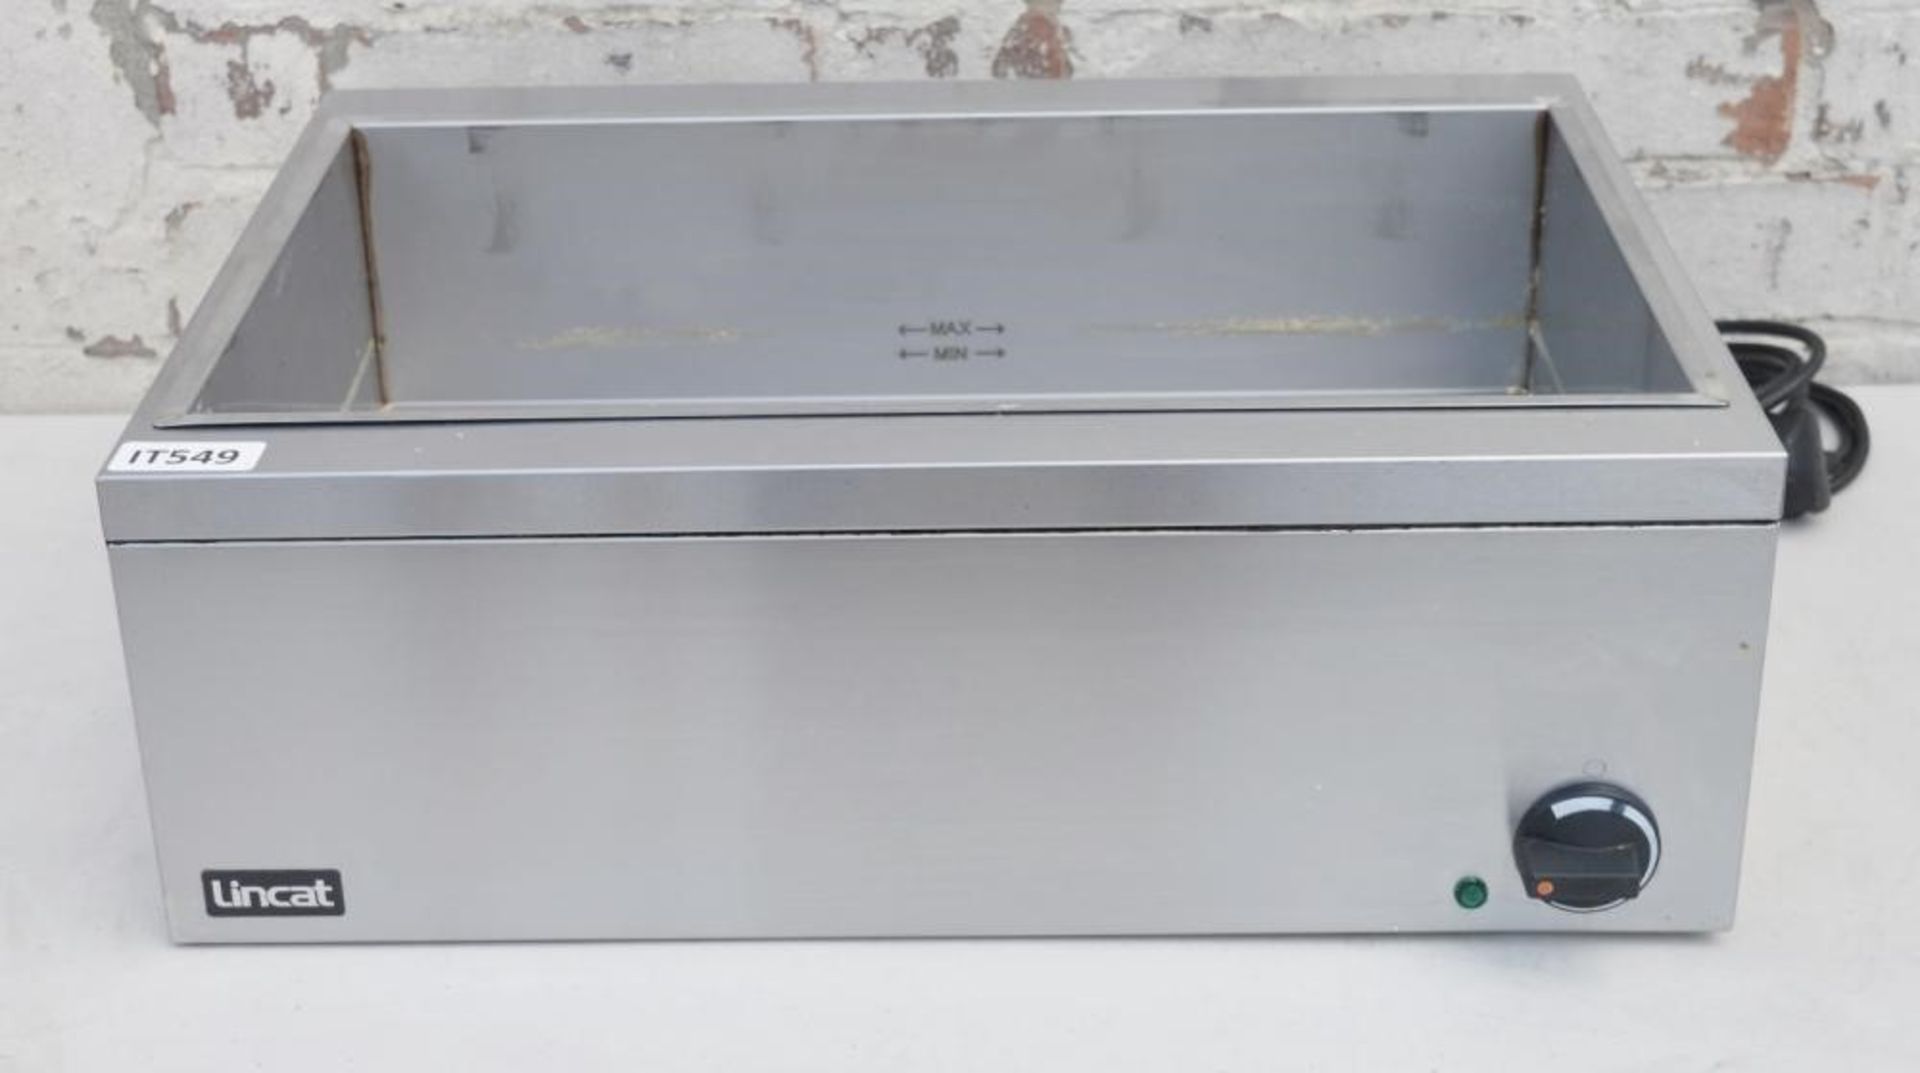 1 x LINCAT Commercial Bain Marie (Model: LBM2W) - 500W Wet And Dry Heat - Stainless Steel Finish - R - Image 4 of 7